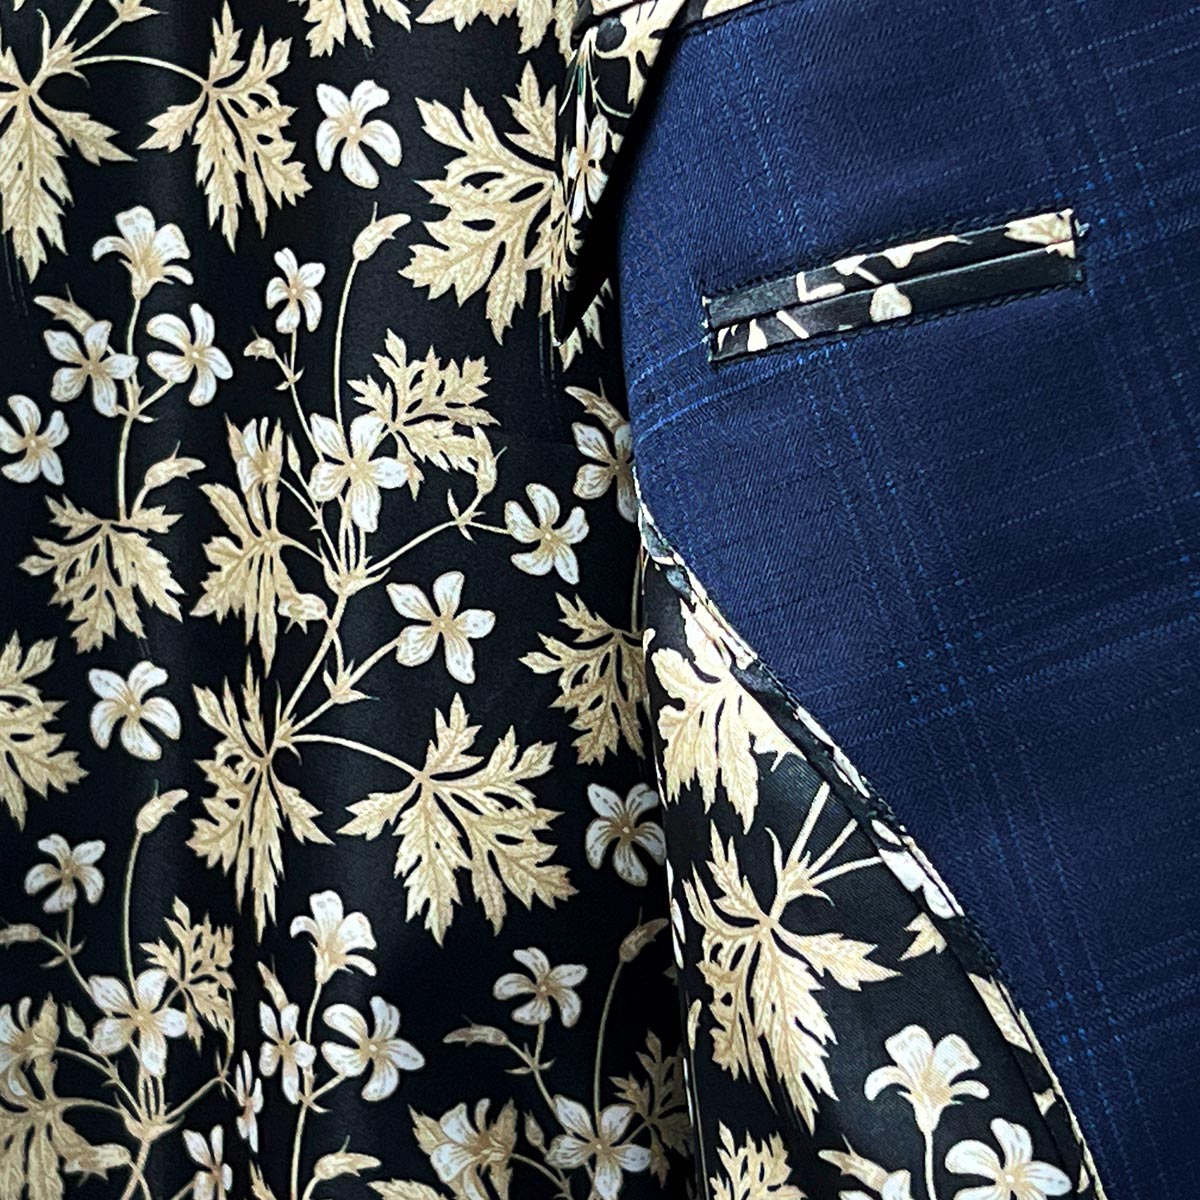 Vibrant flash linings adding a hidden surprise to a midnight blue windowpane suit.